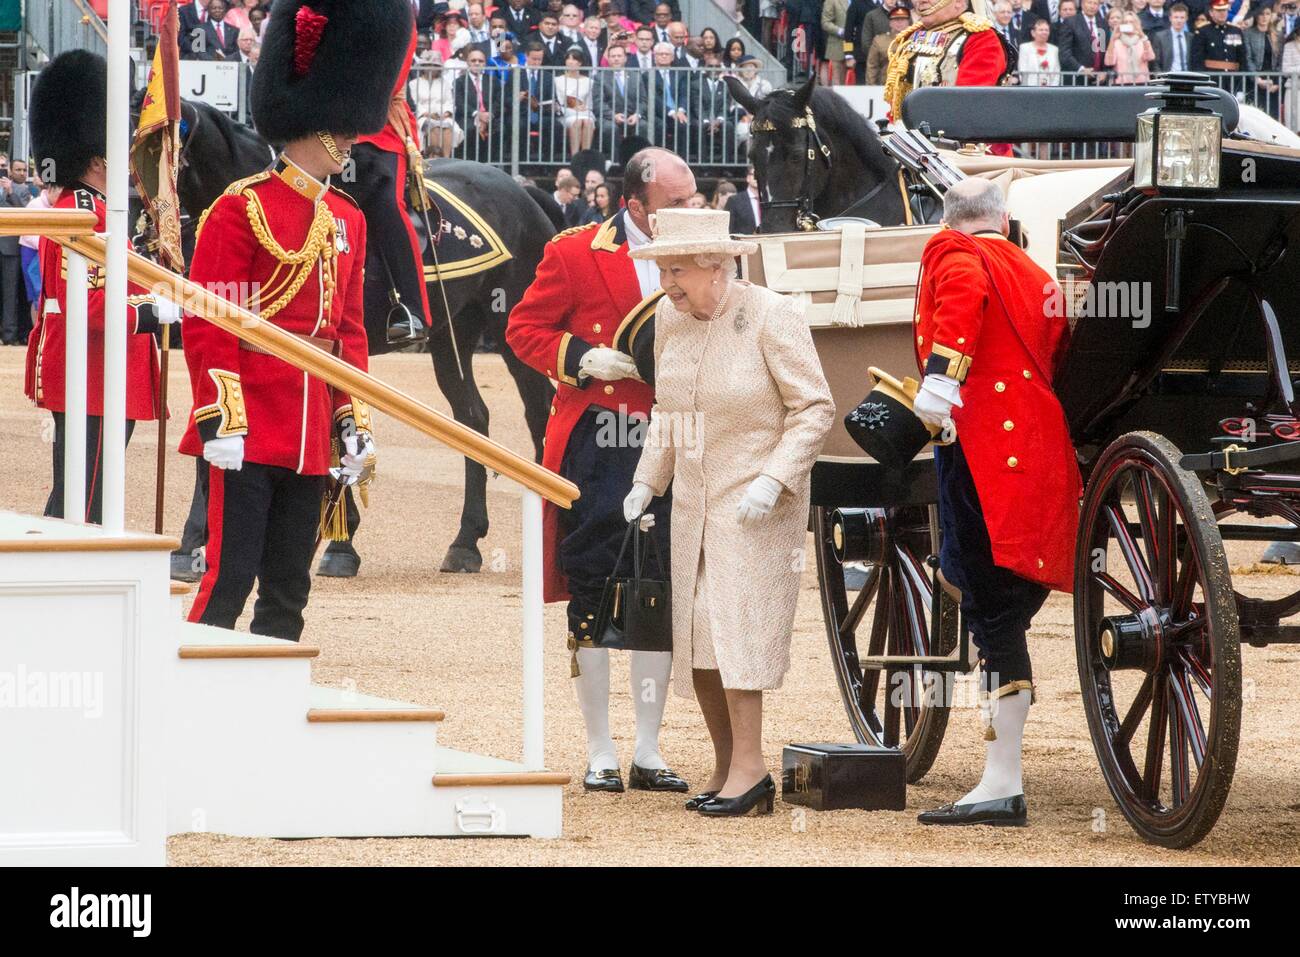 Queen Elizabeth II arrives by carriage for the annual Trooping the Colour parade marking her official birthday on Horse Guards Parade June 13, 2015 in London, England. Stock Photo